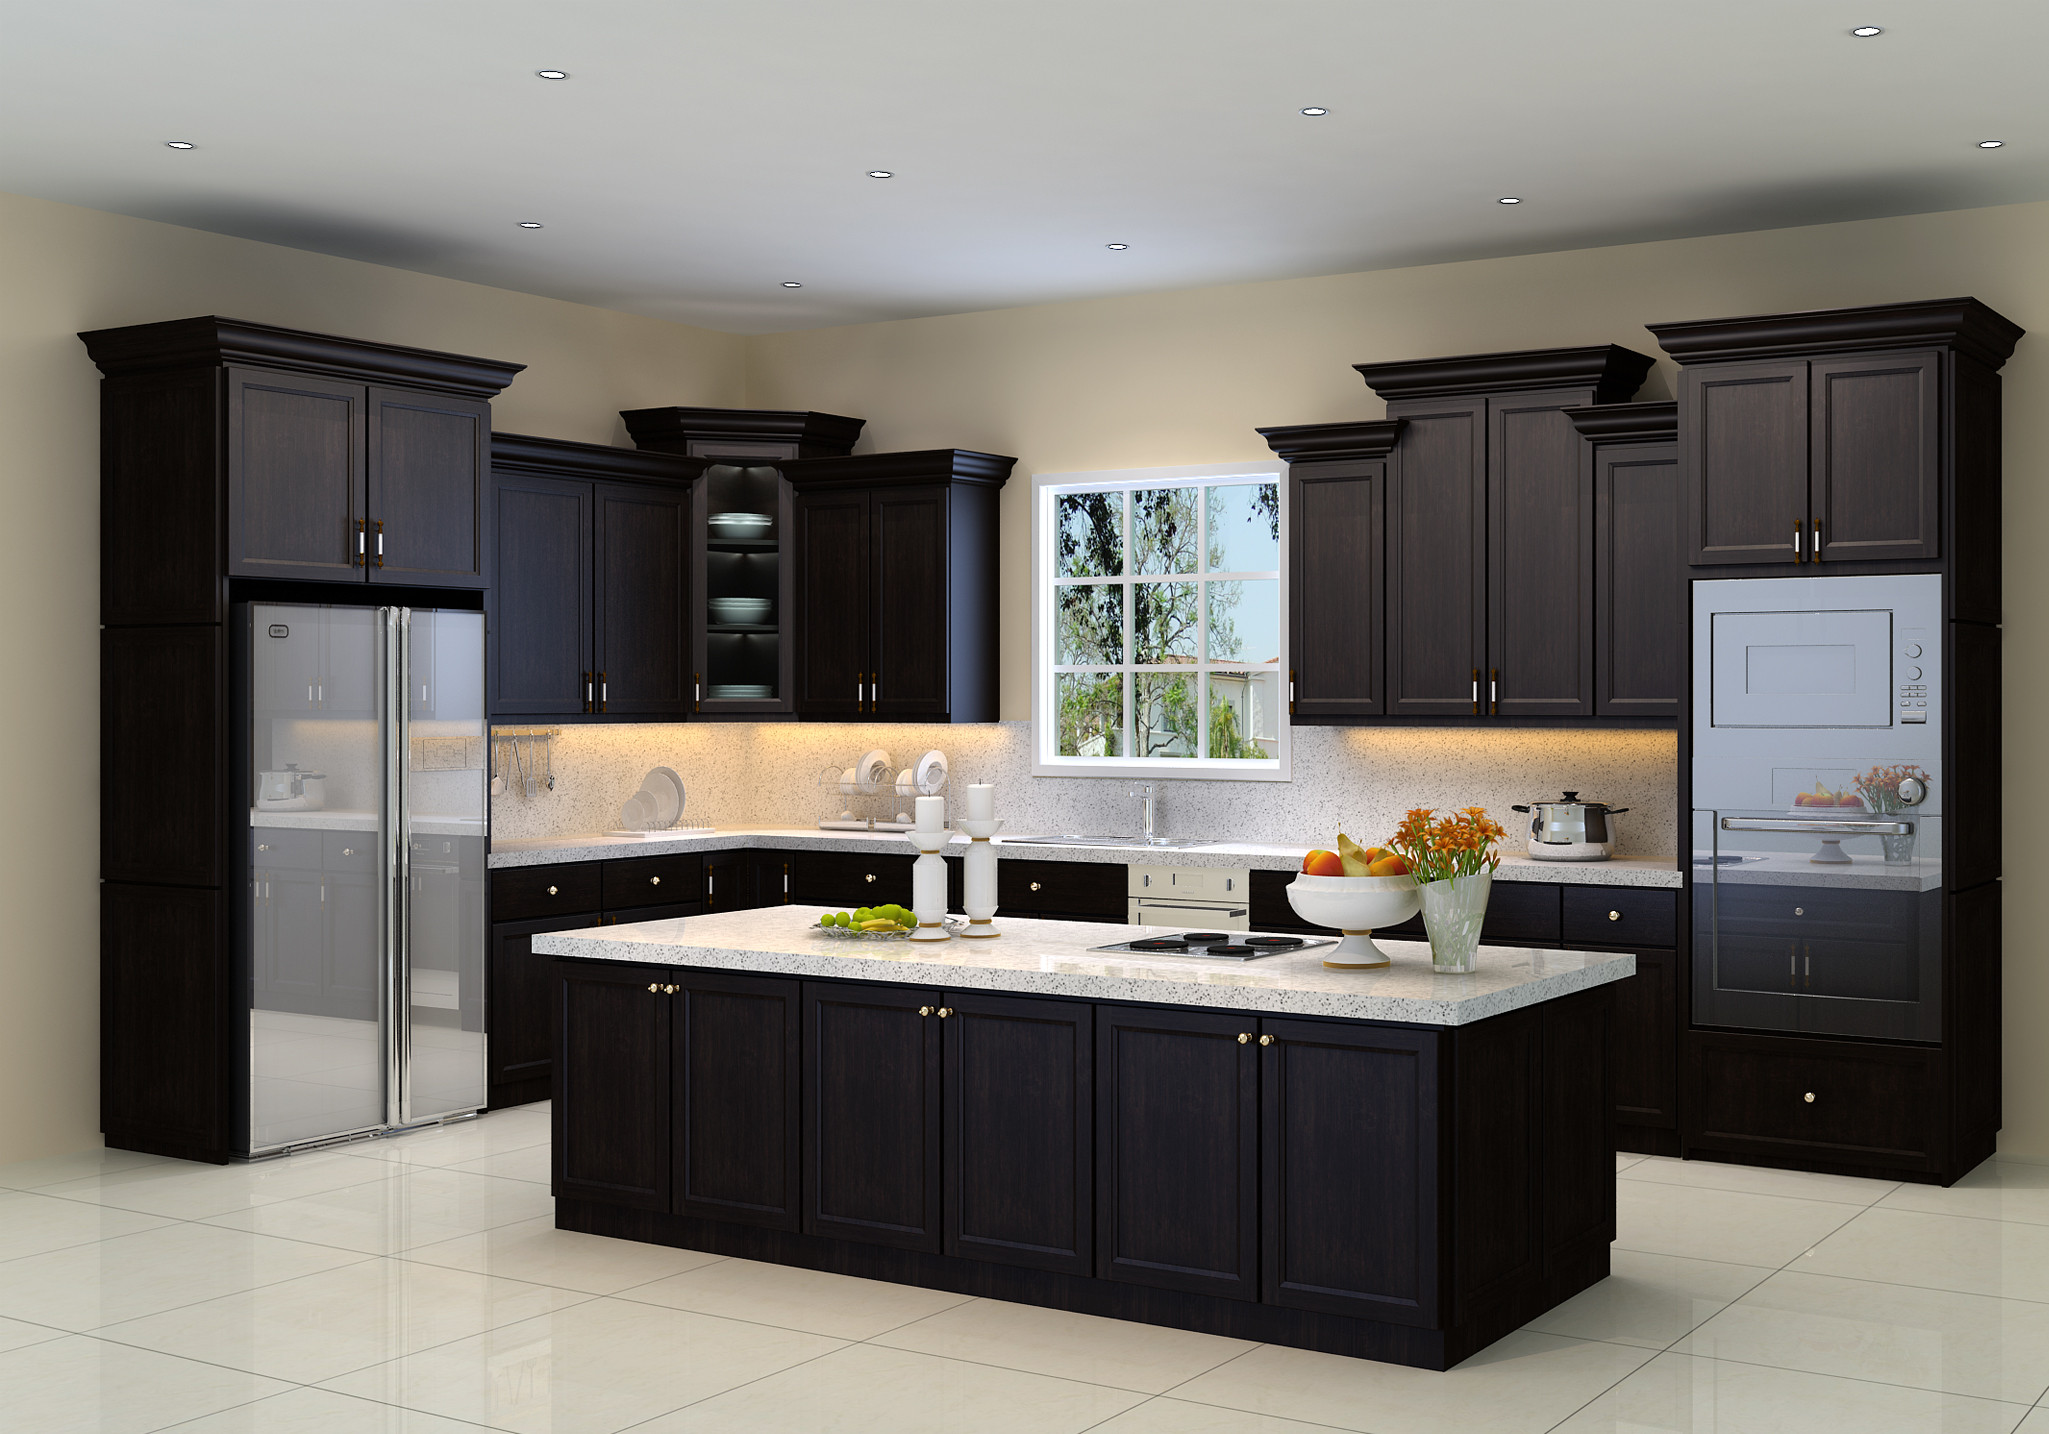 Espresso Kitchen Cabinets
 Kitchen Cabinets and Bathroom Cabinetry